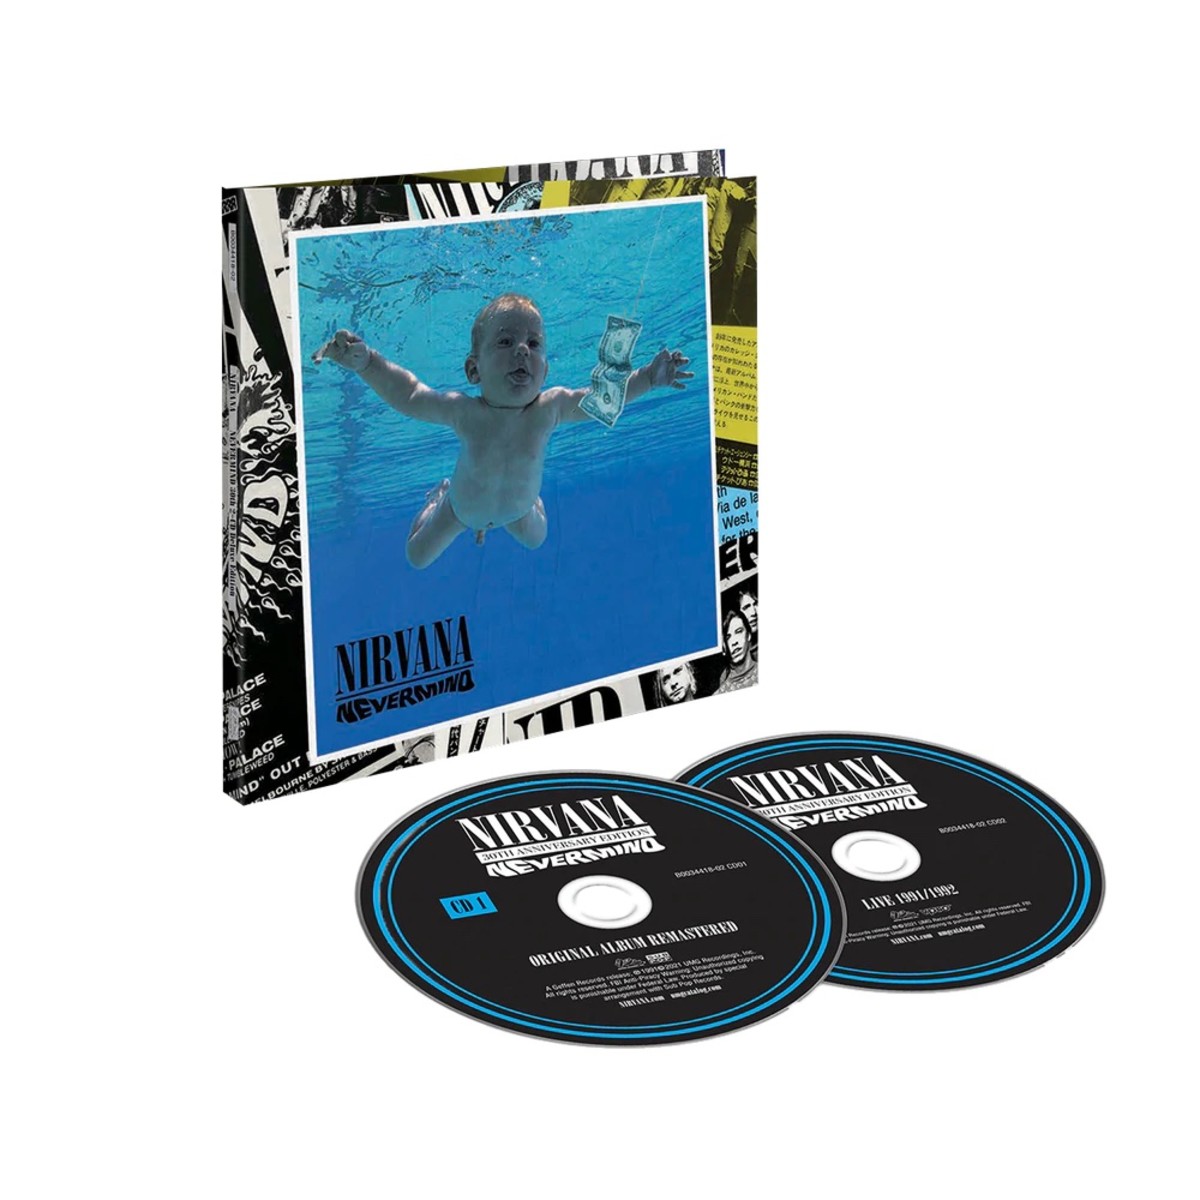 The 2-CD 30th Anniversary set of Nirvana's 'Nevermind' packs a really good 'best bang for your buck'!